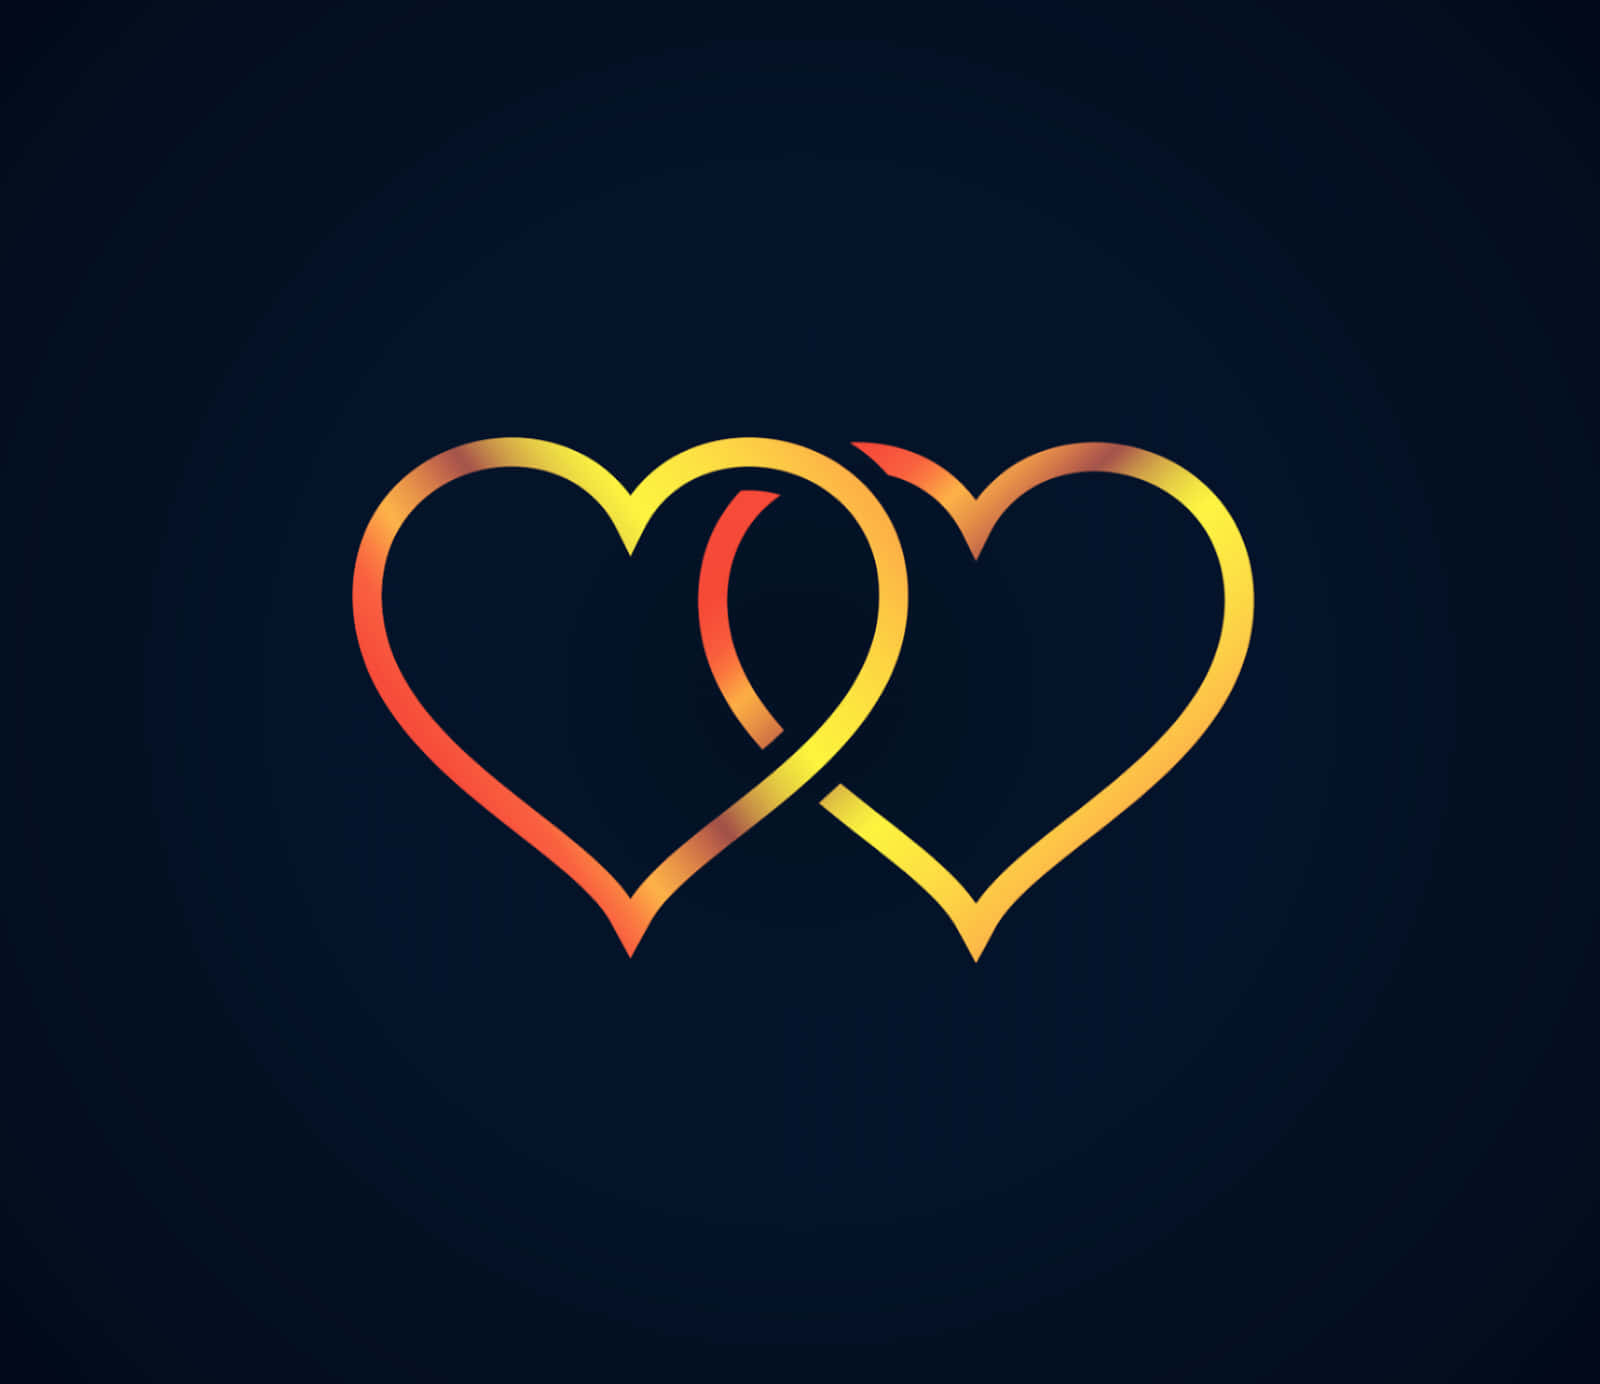 Cute Two Golden Hearts For Love Background